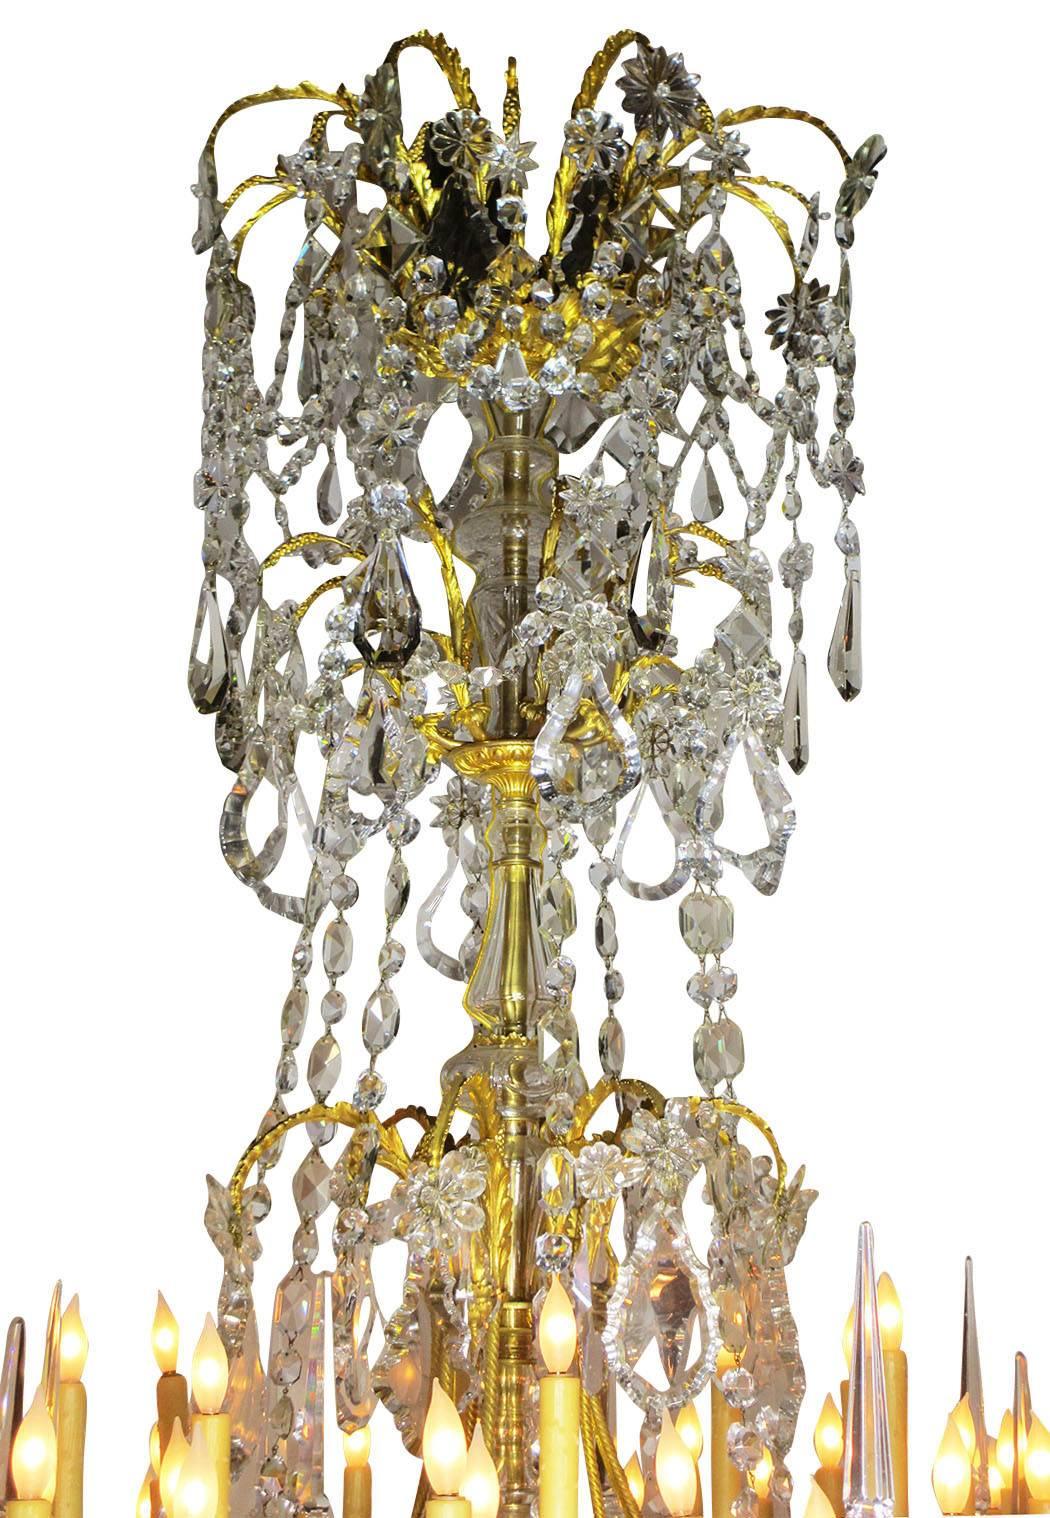 The Spelling Manor Grand Foyer Chandelier - A Very Fine and Palatial French 19th Century Louis XV Style Figural Gilt-Bronze and Baccarat Crystal Forty-Eight Light Chandelier. The large finely chased gilt-bronze frame with scrolls, flower and foliage